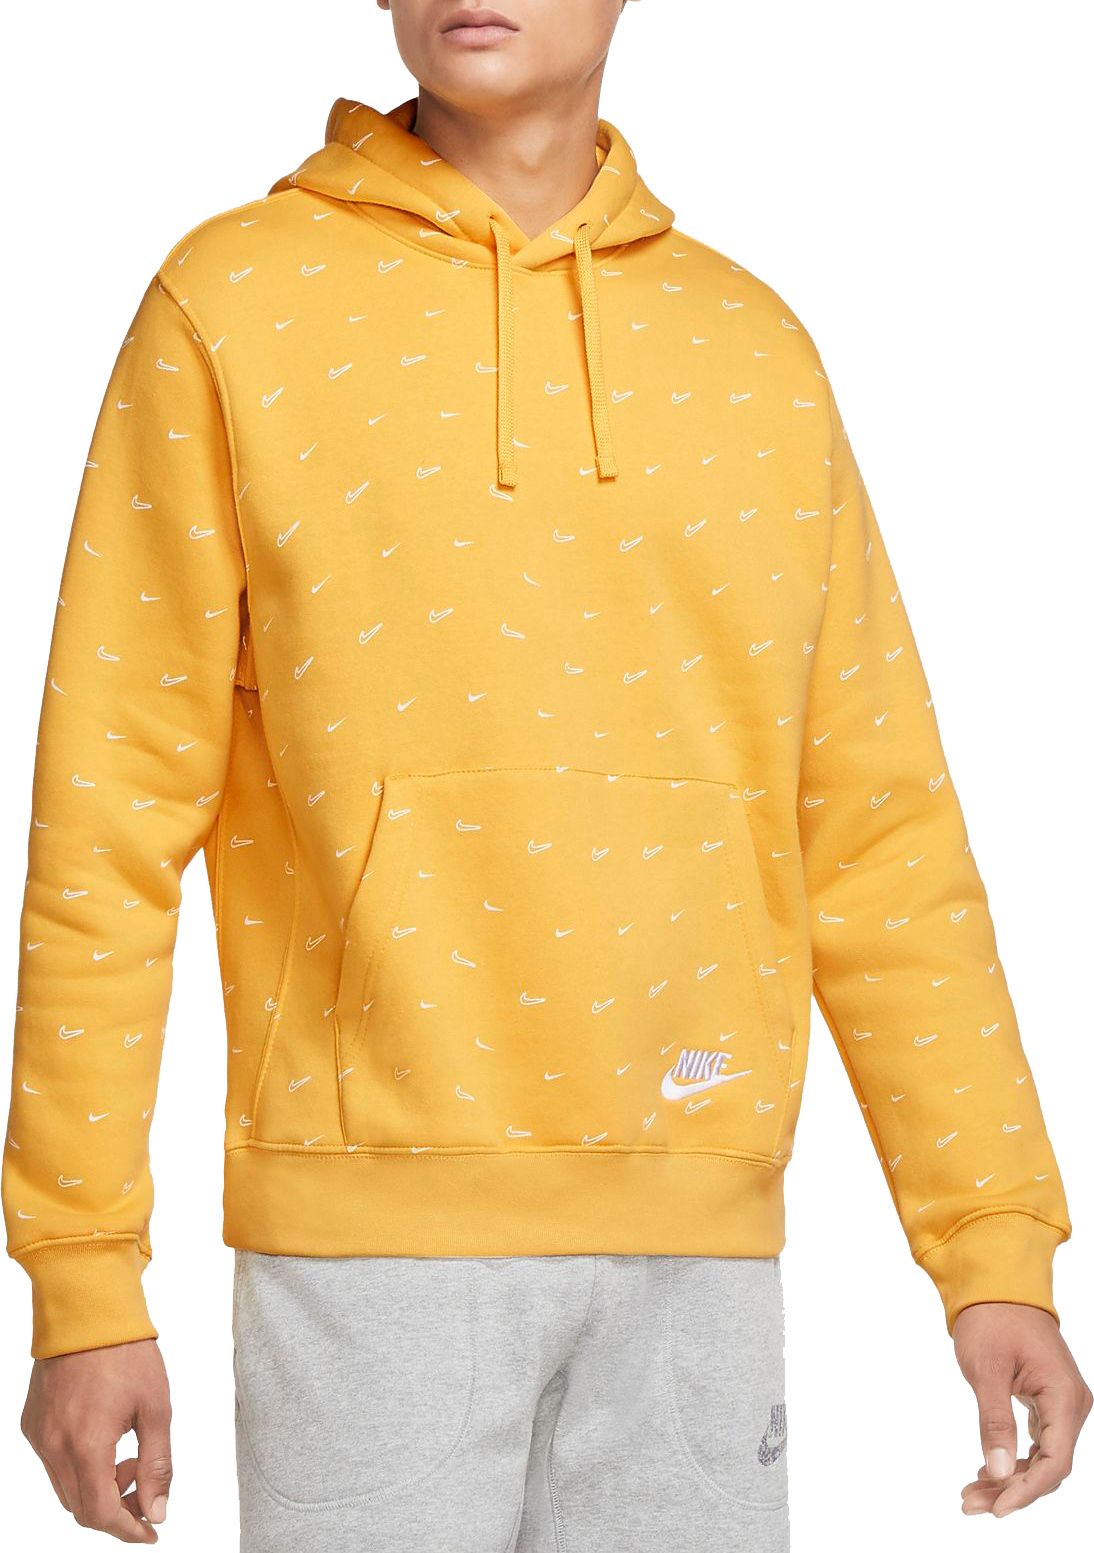 nike sweatshirt with nike signs all over it